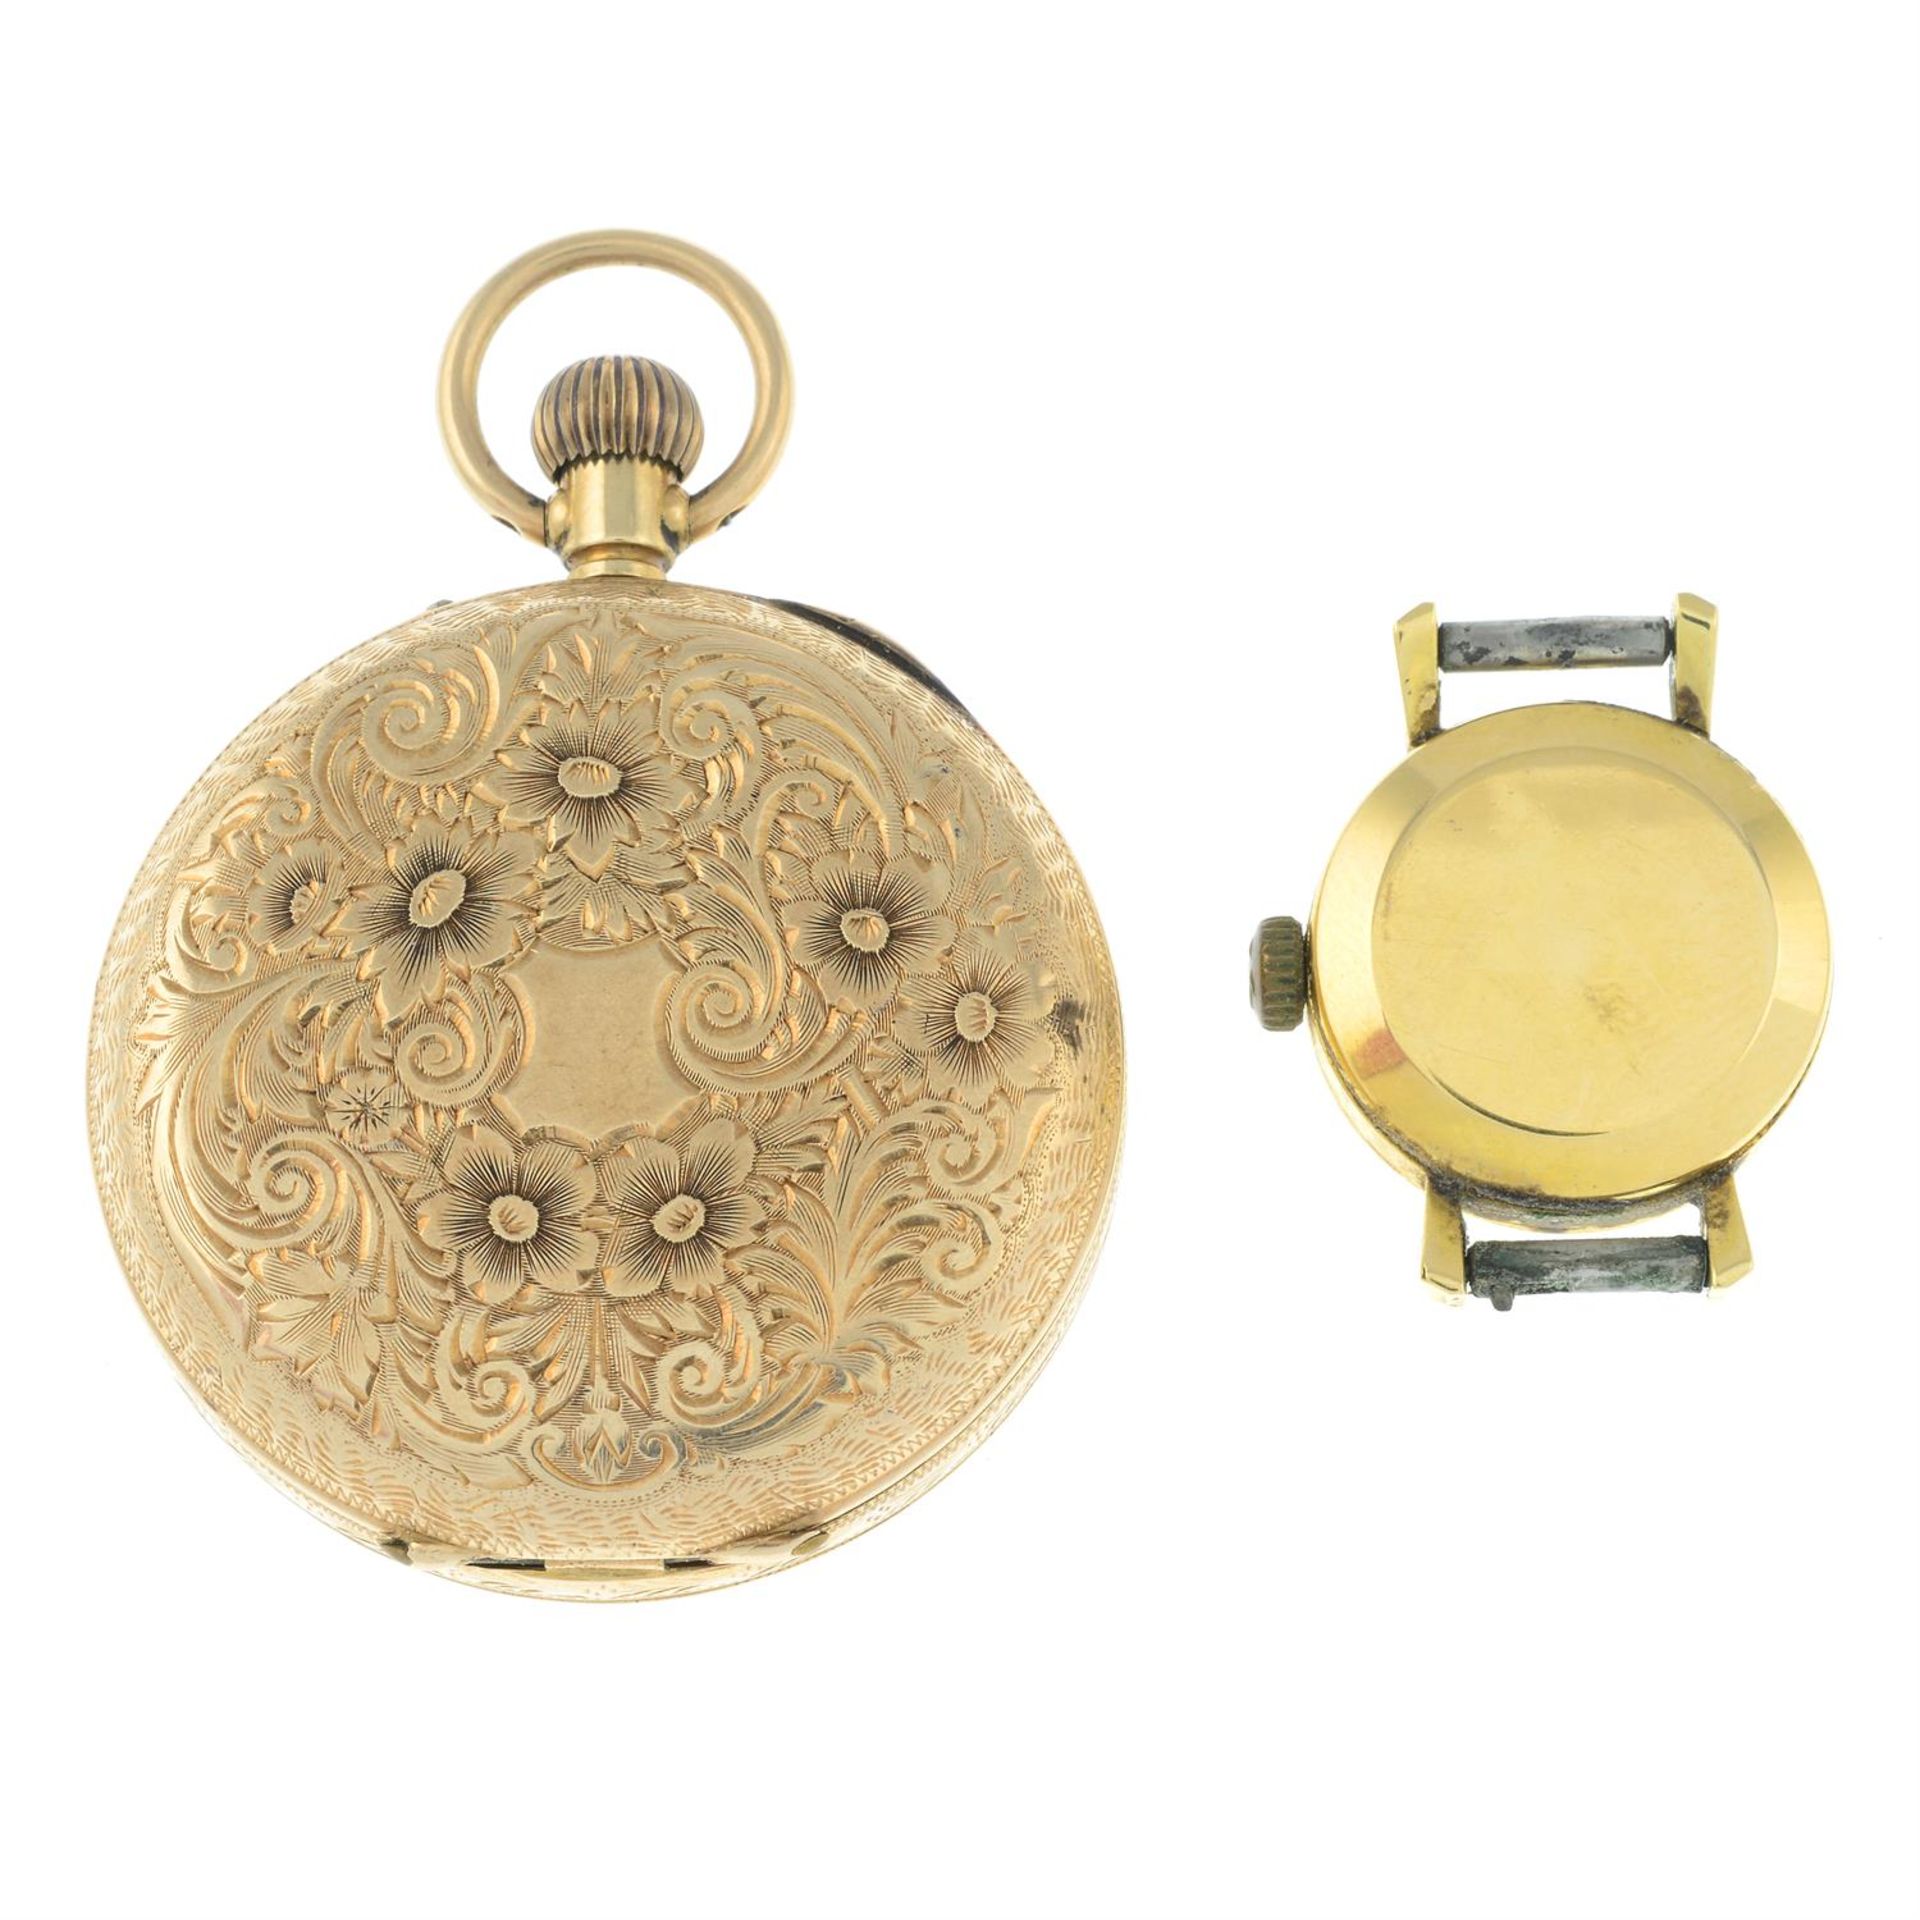 A lady's watch head, by Omega and an early 20th century 12ct gold pocket watch. - Image 2 of 2